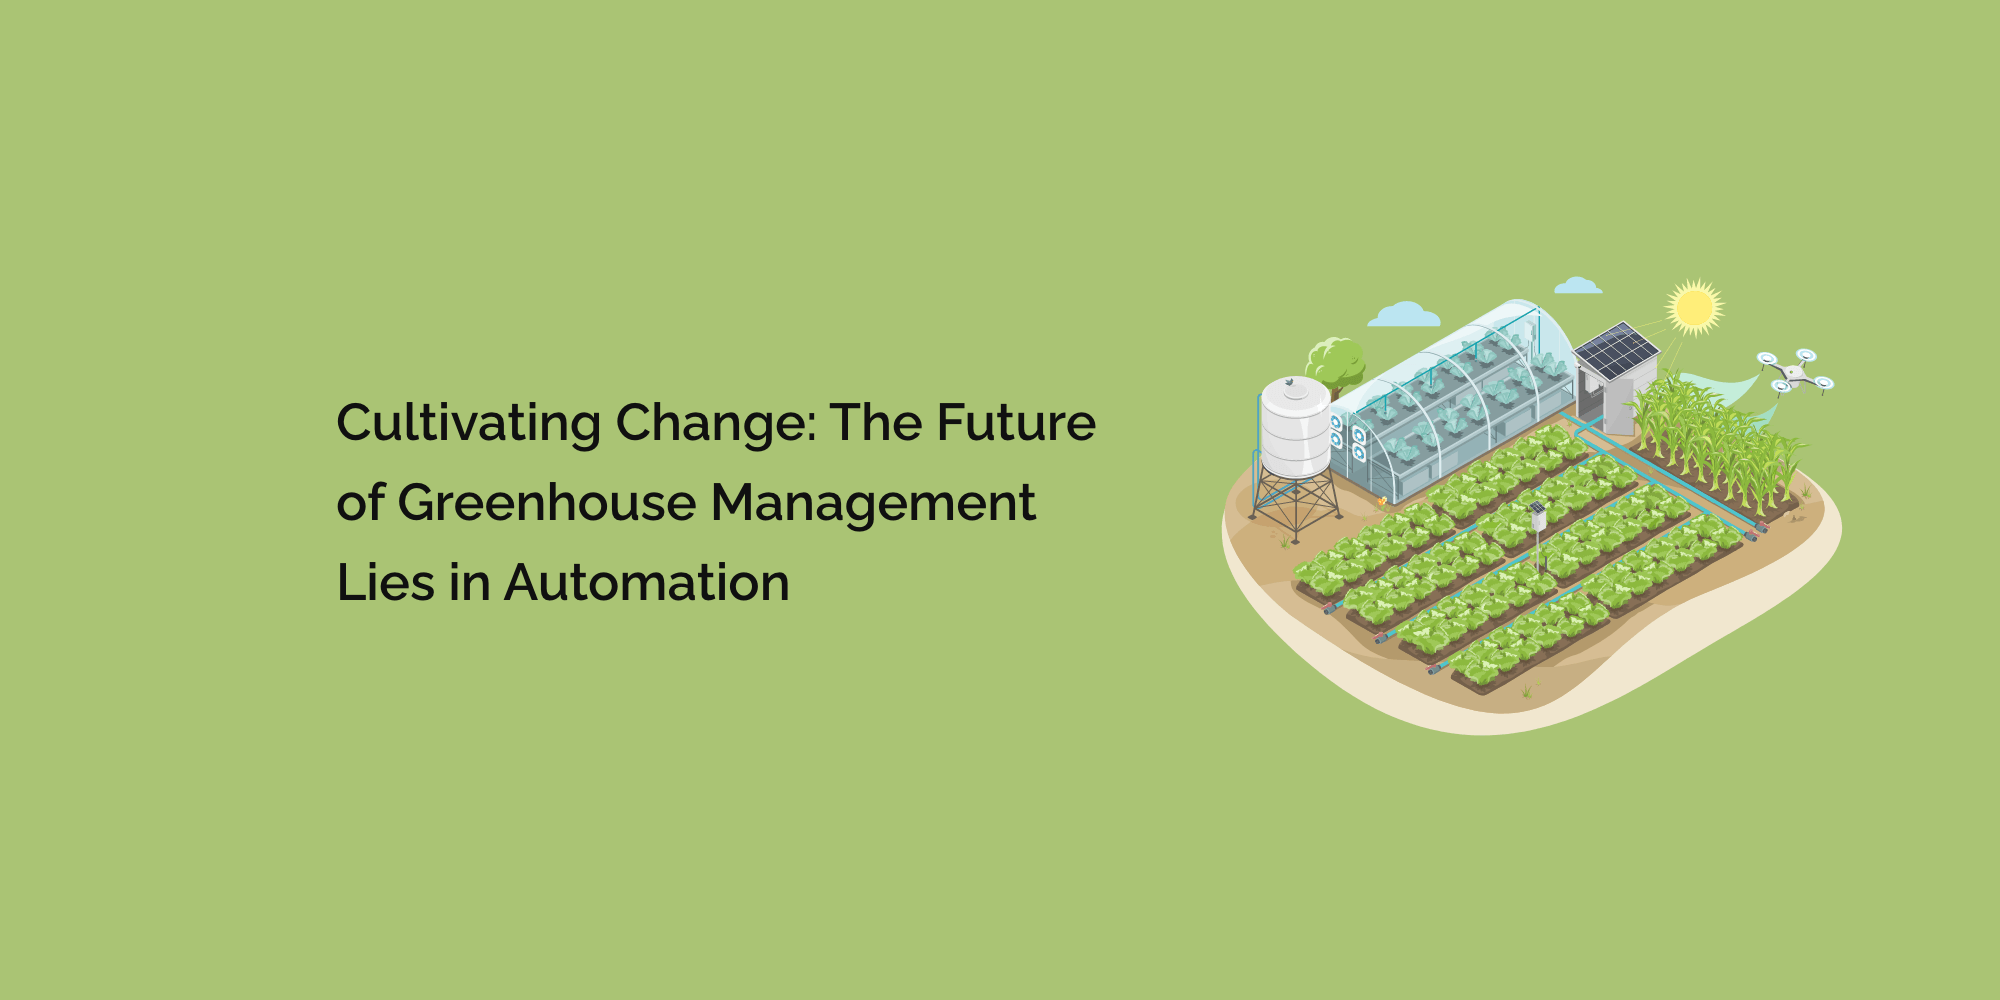 Cultivating Change: The Future of Greenhouse Management Lies in Automation